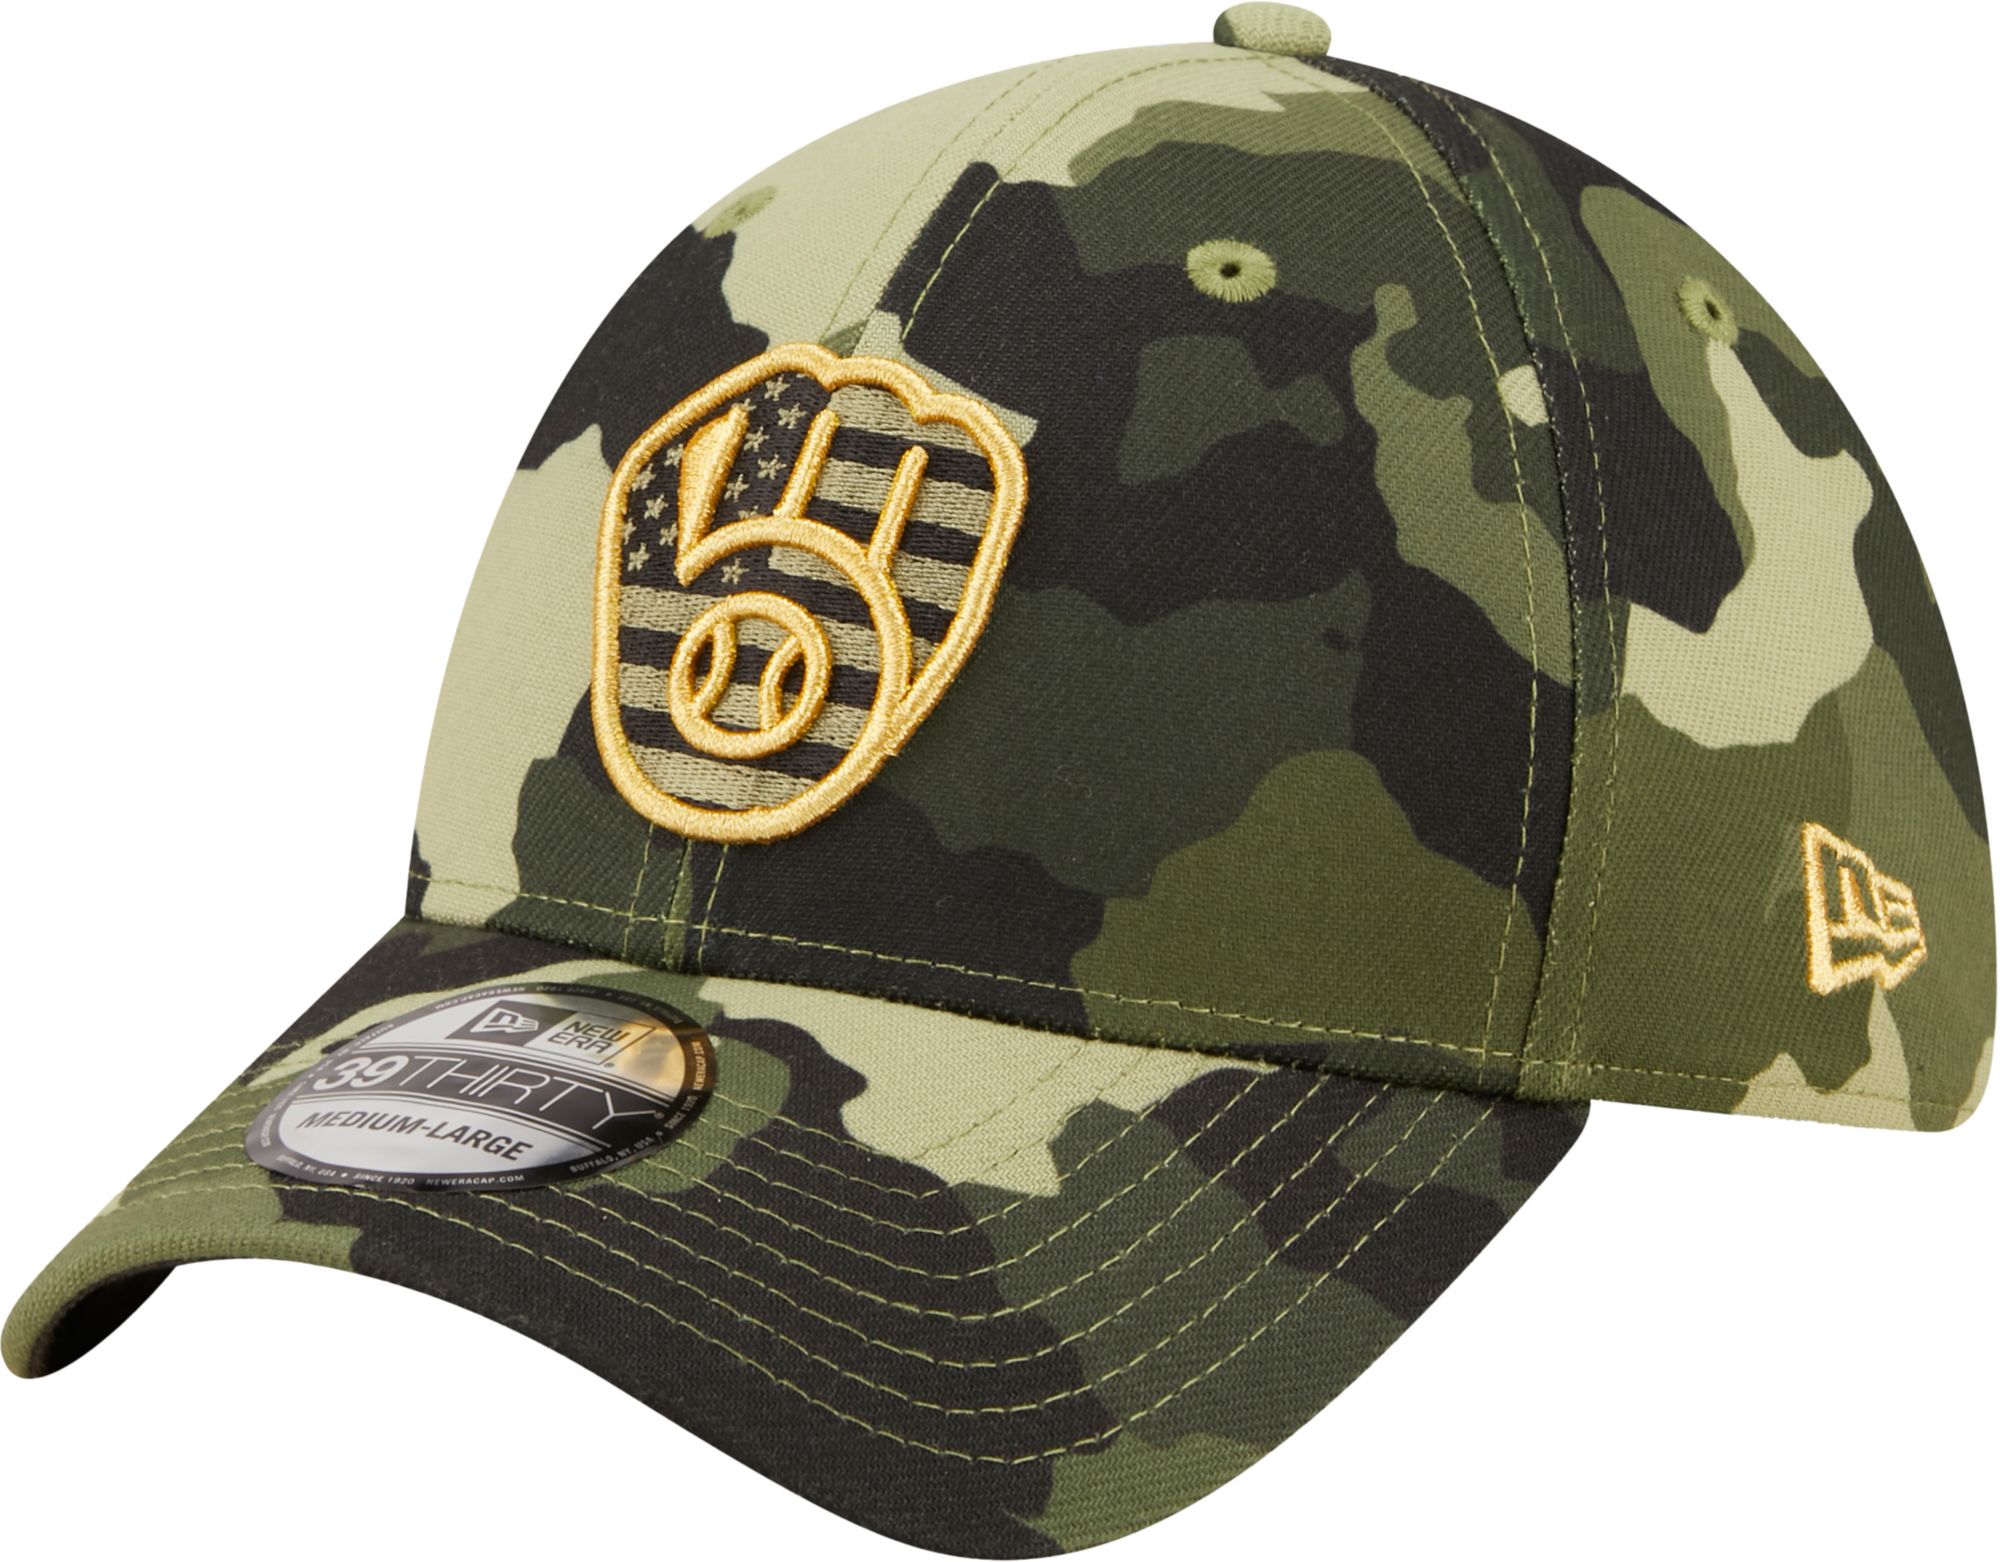 Men's San Diego Padres New Era Camo 2021 Armed Forces Day 39THIRTY